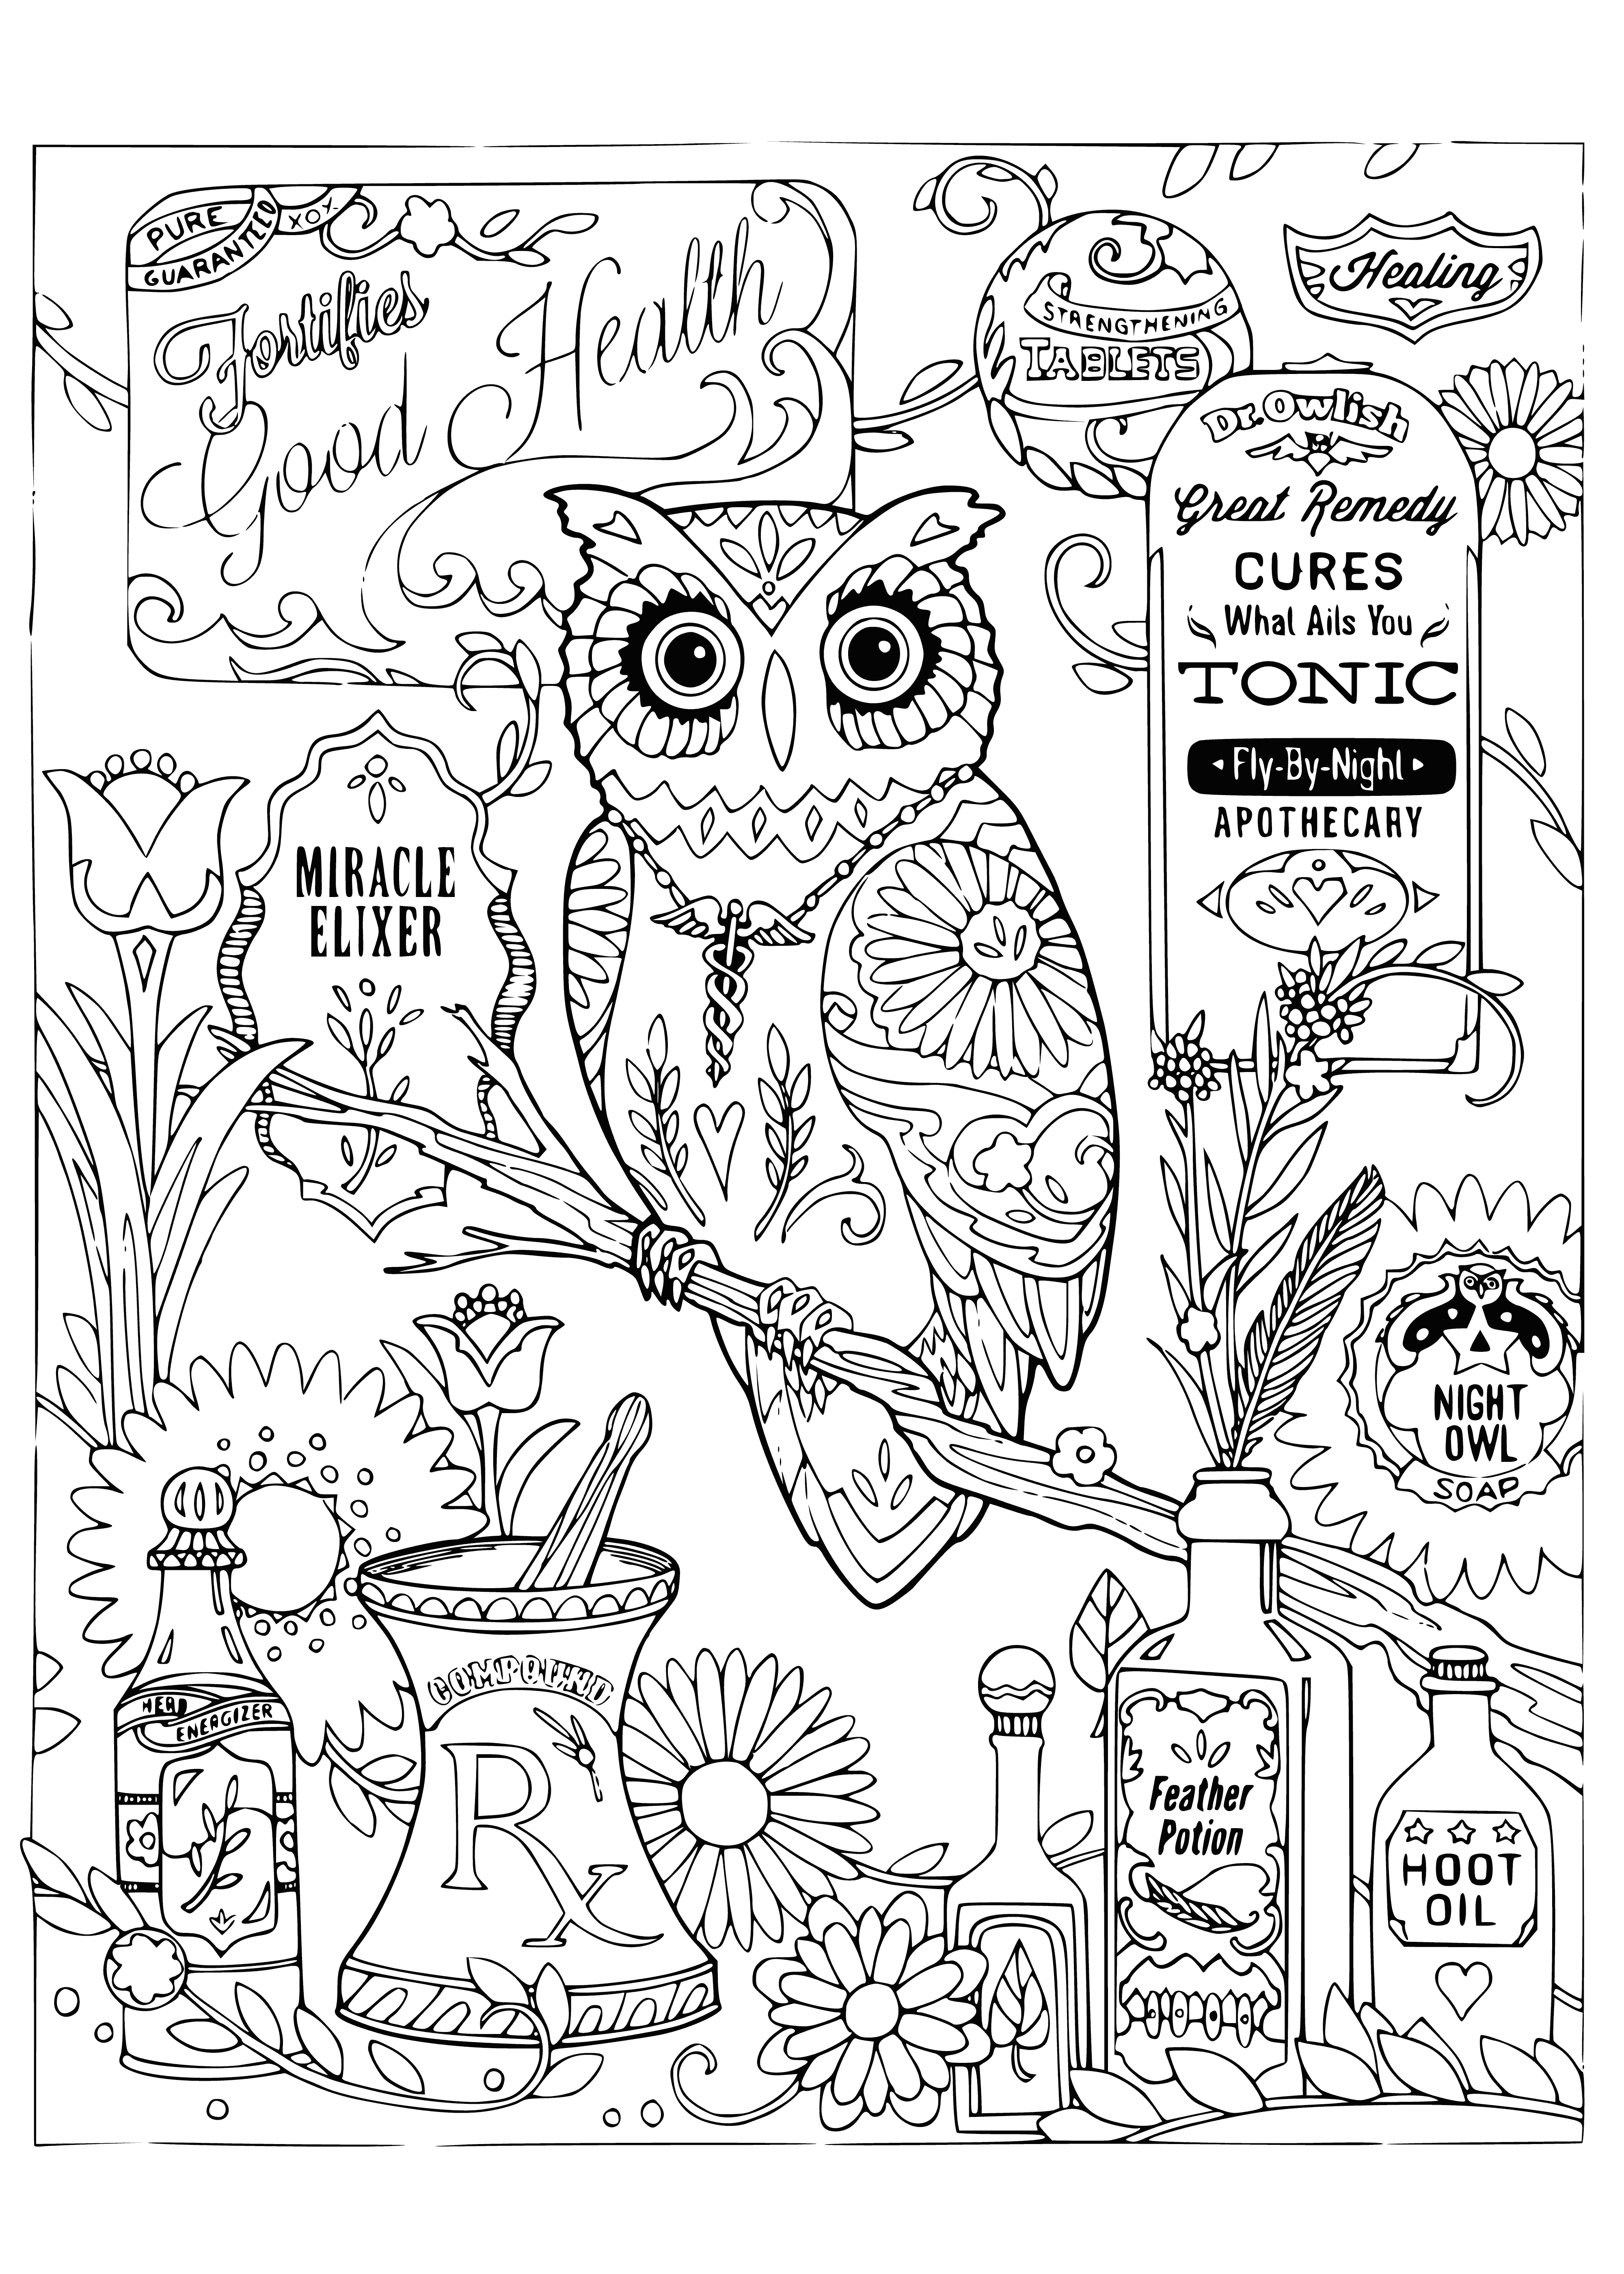 Pharmacy coloring page